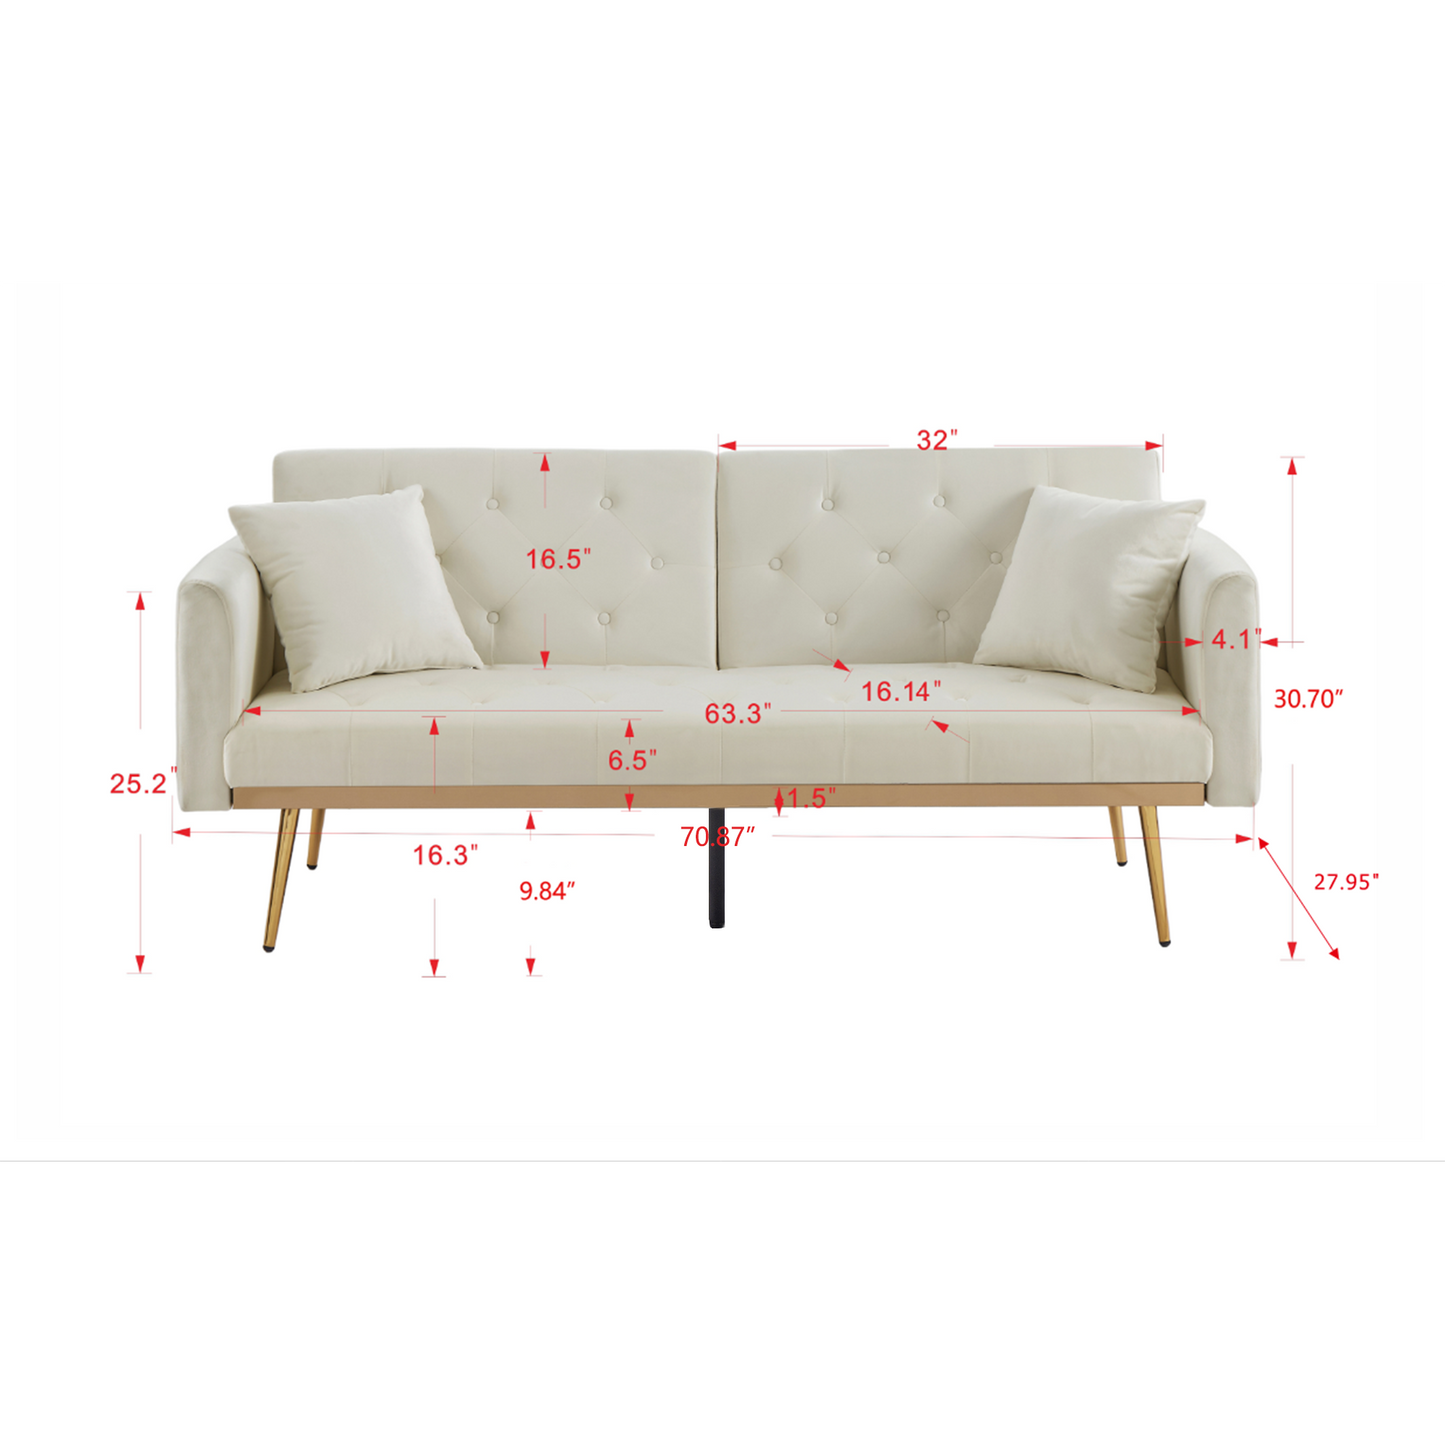 Convertible Futon Sofa Bed, Modern Reclining Futon Loveseat Couch with 2 Pillowa Sleeper Sofa for Dorm Room Living Room Bedroom Office